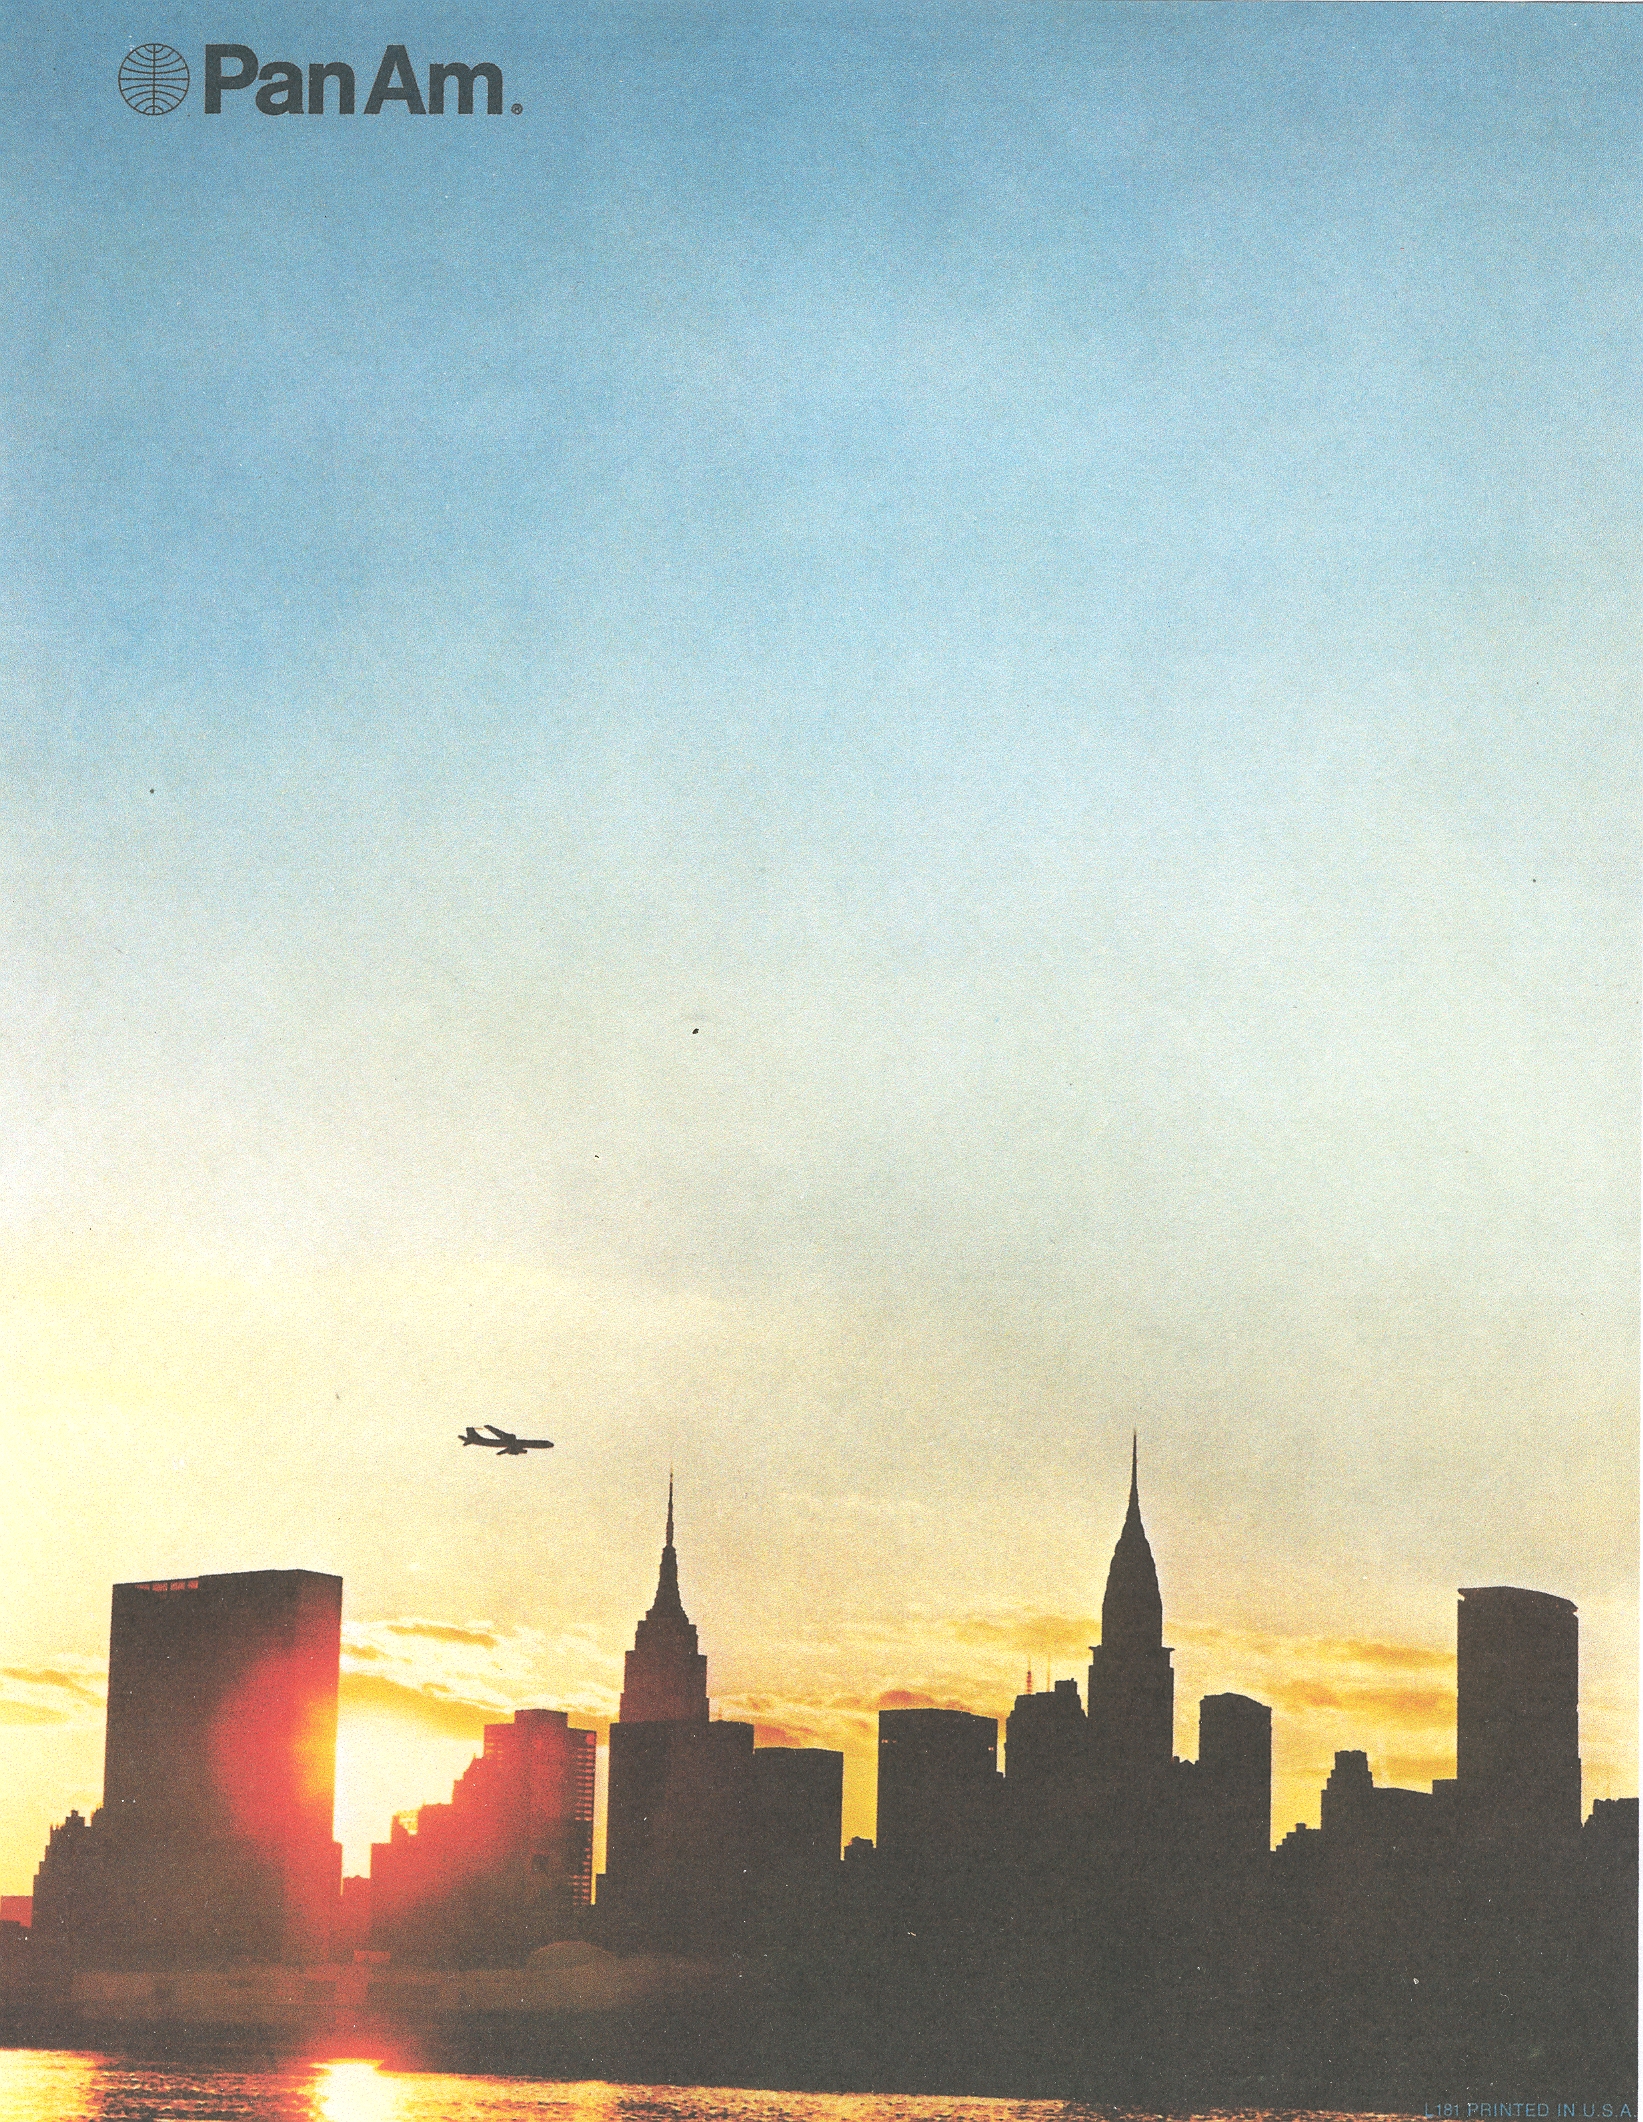 Early 1970s New York City Helvetica style letterhead.  This type of document was called a shell and could be used for multiple promotions of fares and events for New York.